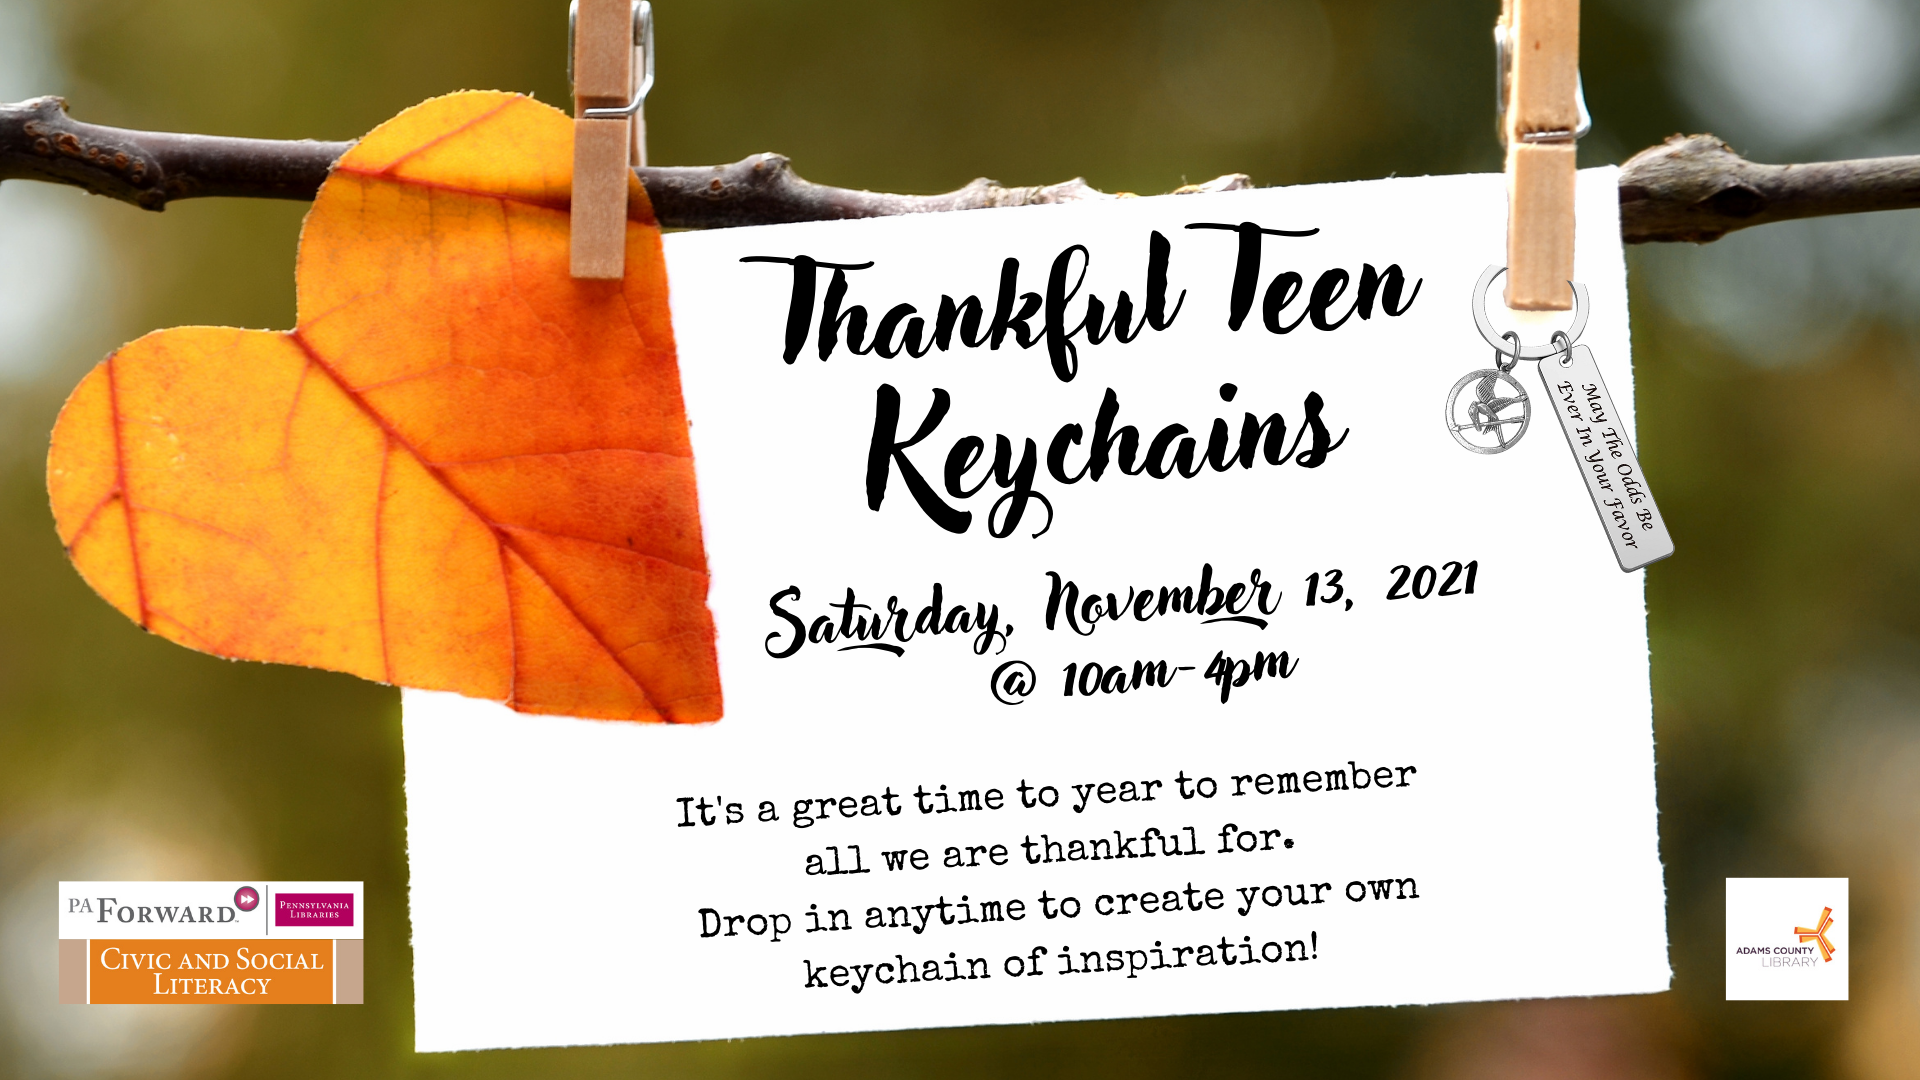 Drop in any time on Saturday, November 13th for Thankful Teen Keychains!